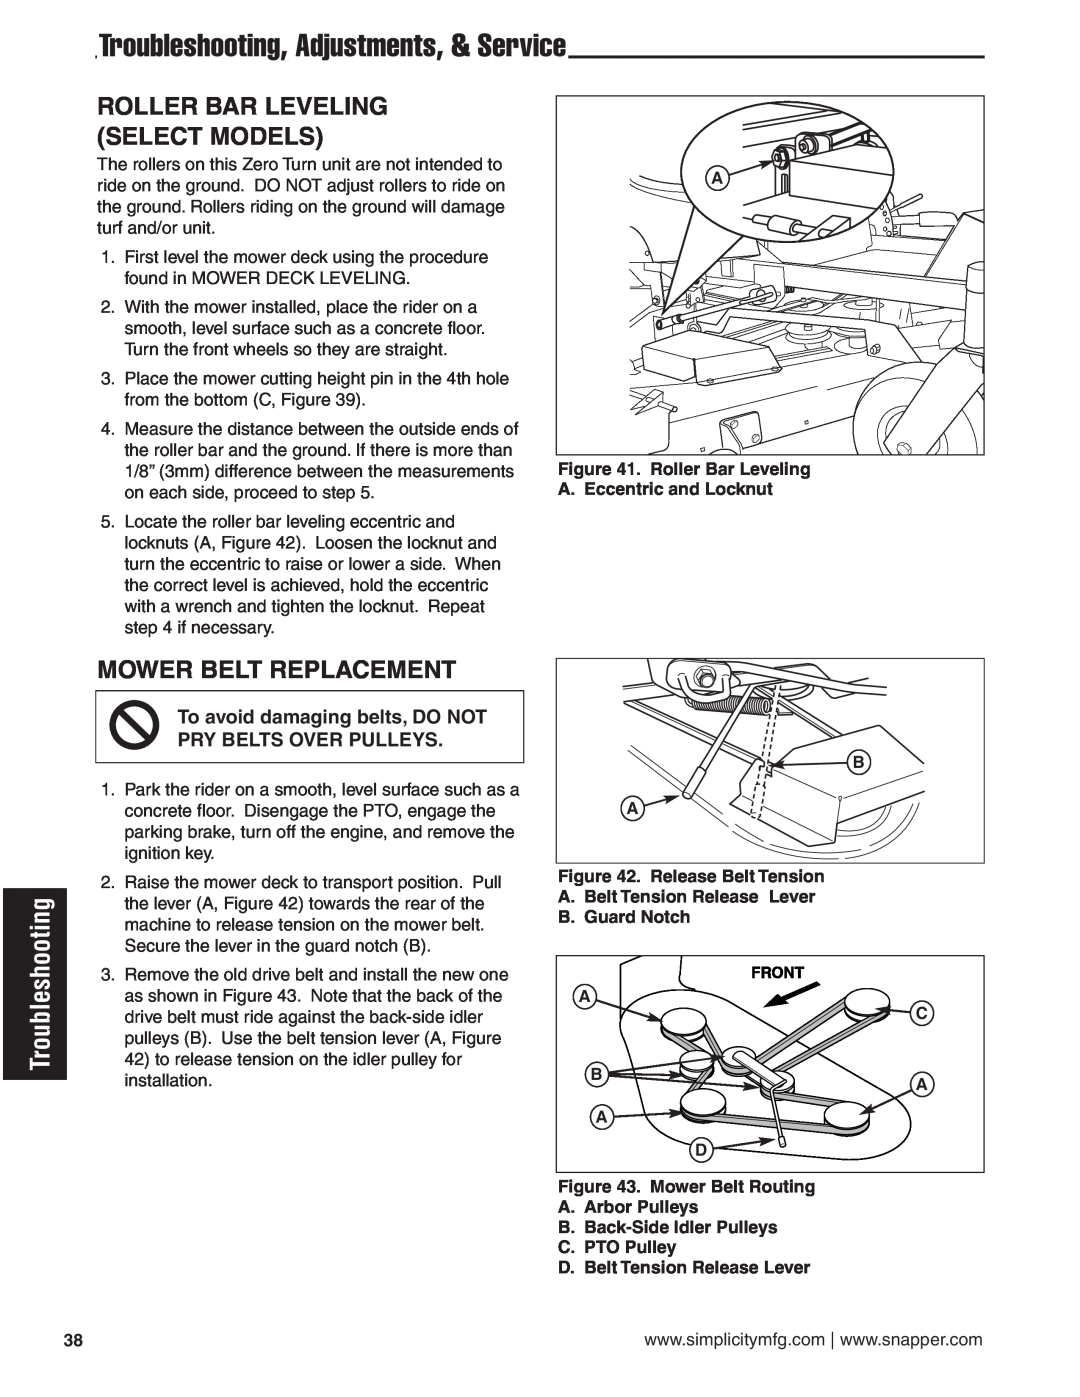 Simplicity 24HP manual Roller Bar Leveling Select Models, Mower Belt Replacement, Troubleshooting, Adjustments, & Service 